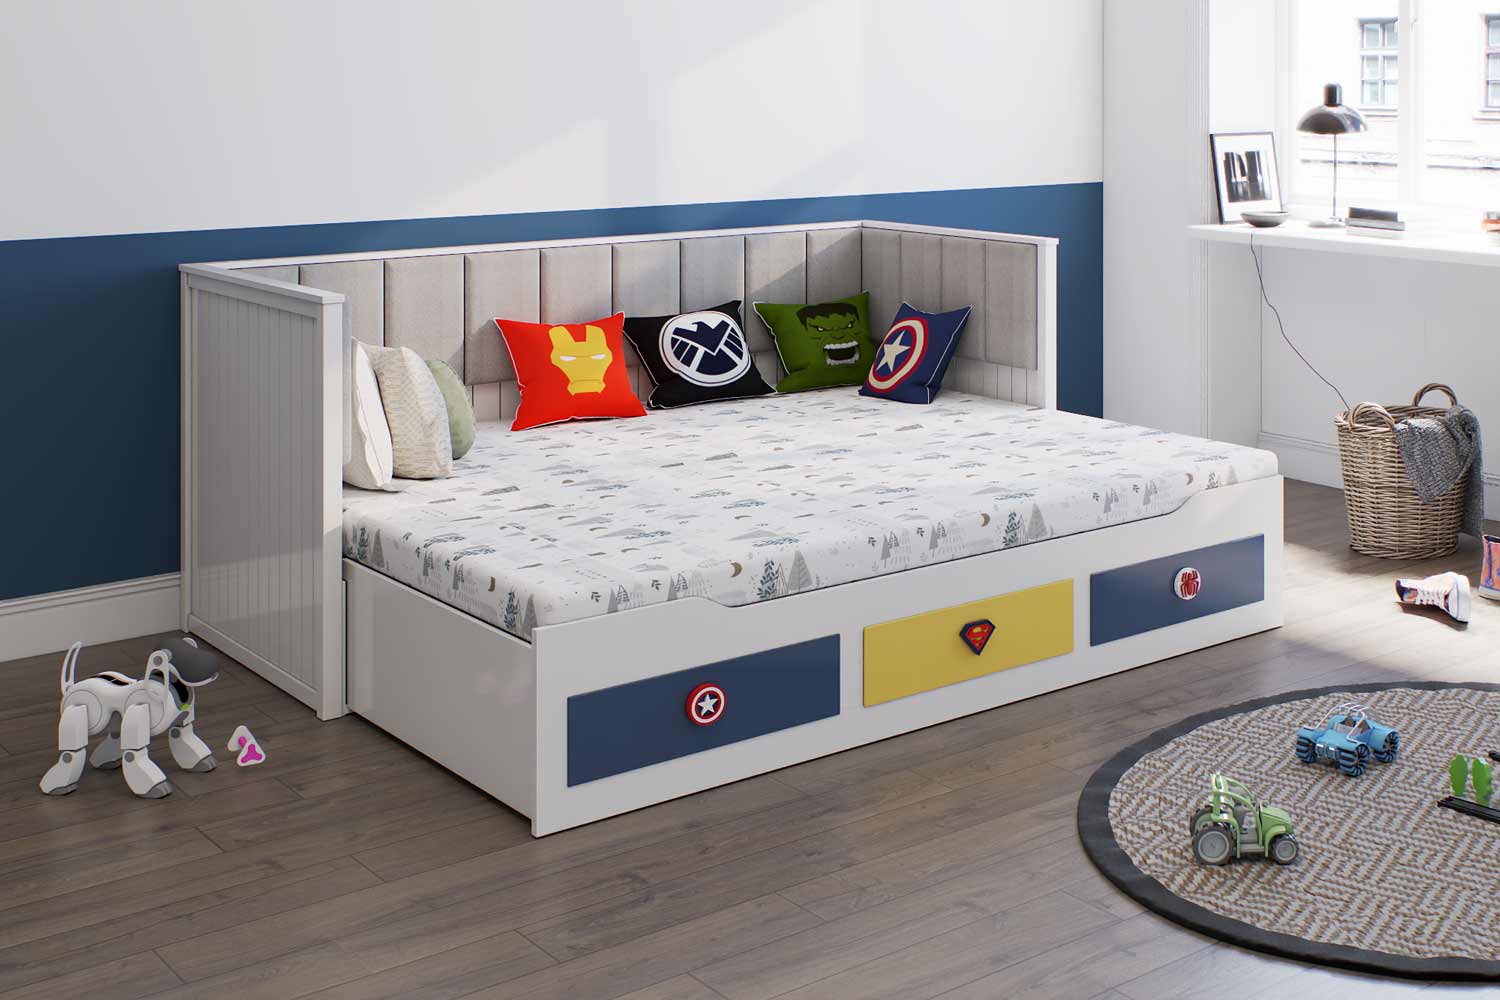 Cozy children's room with a stylish trundle bed adorned with superhero cushions, set against a two-tone wall, inviting playful imagination and rest.